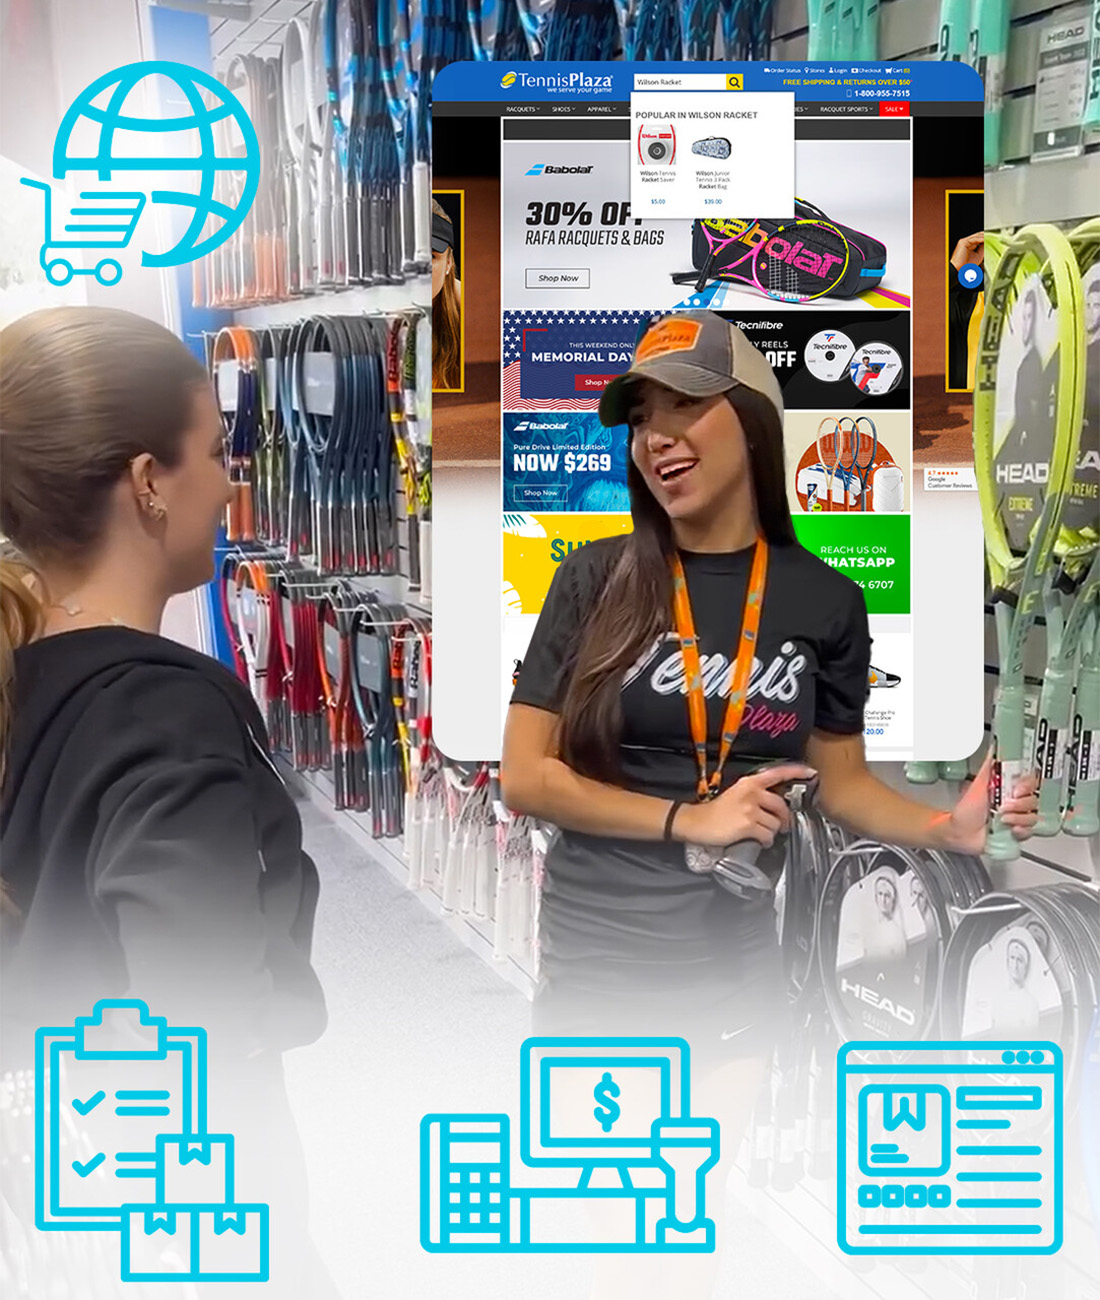 Tennis Plaza Retail Success Story Solutions